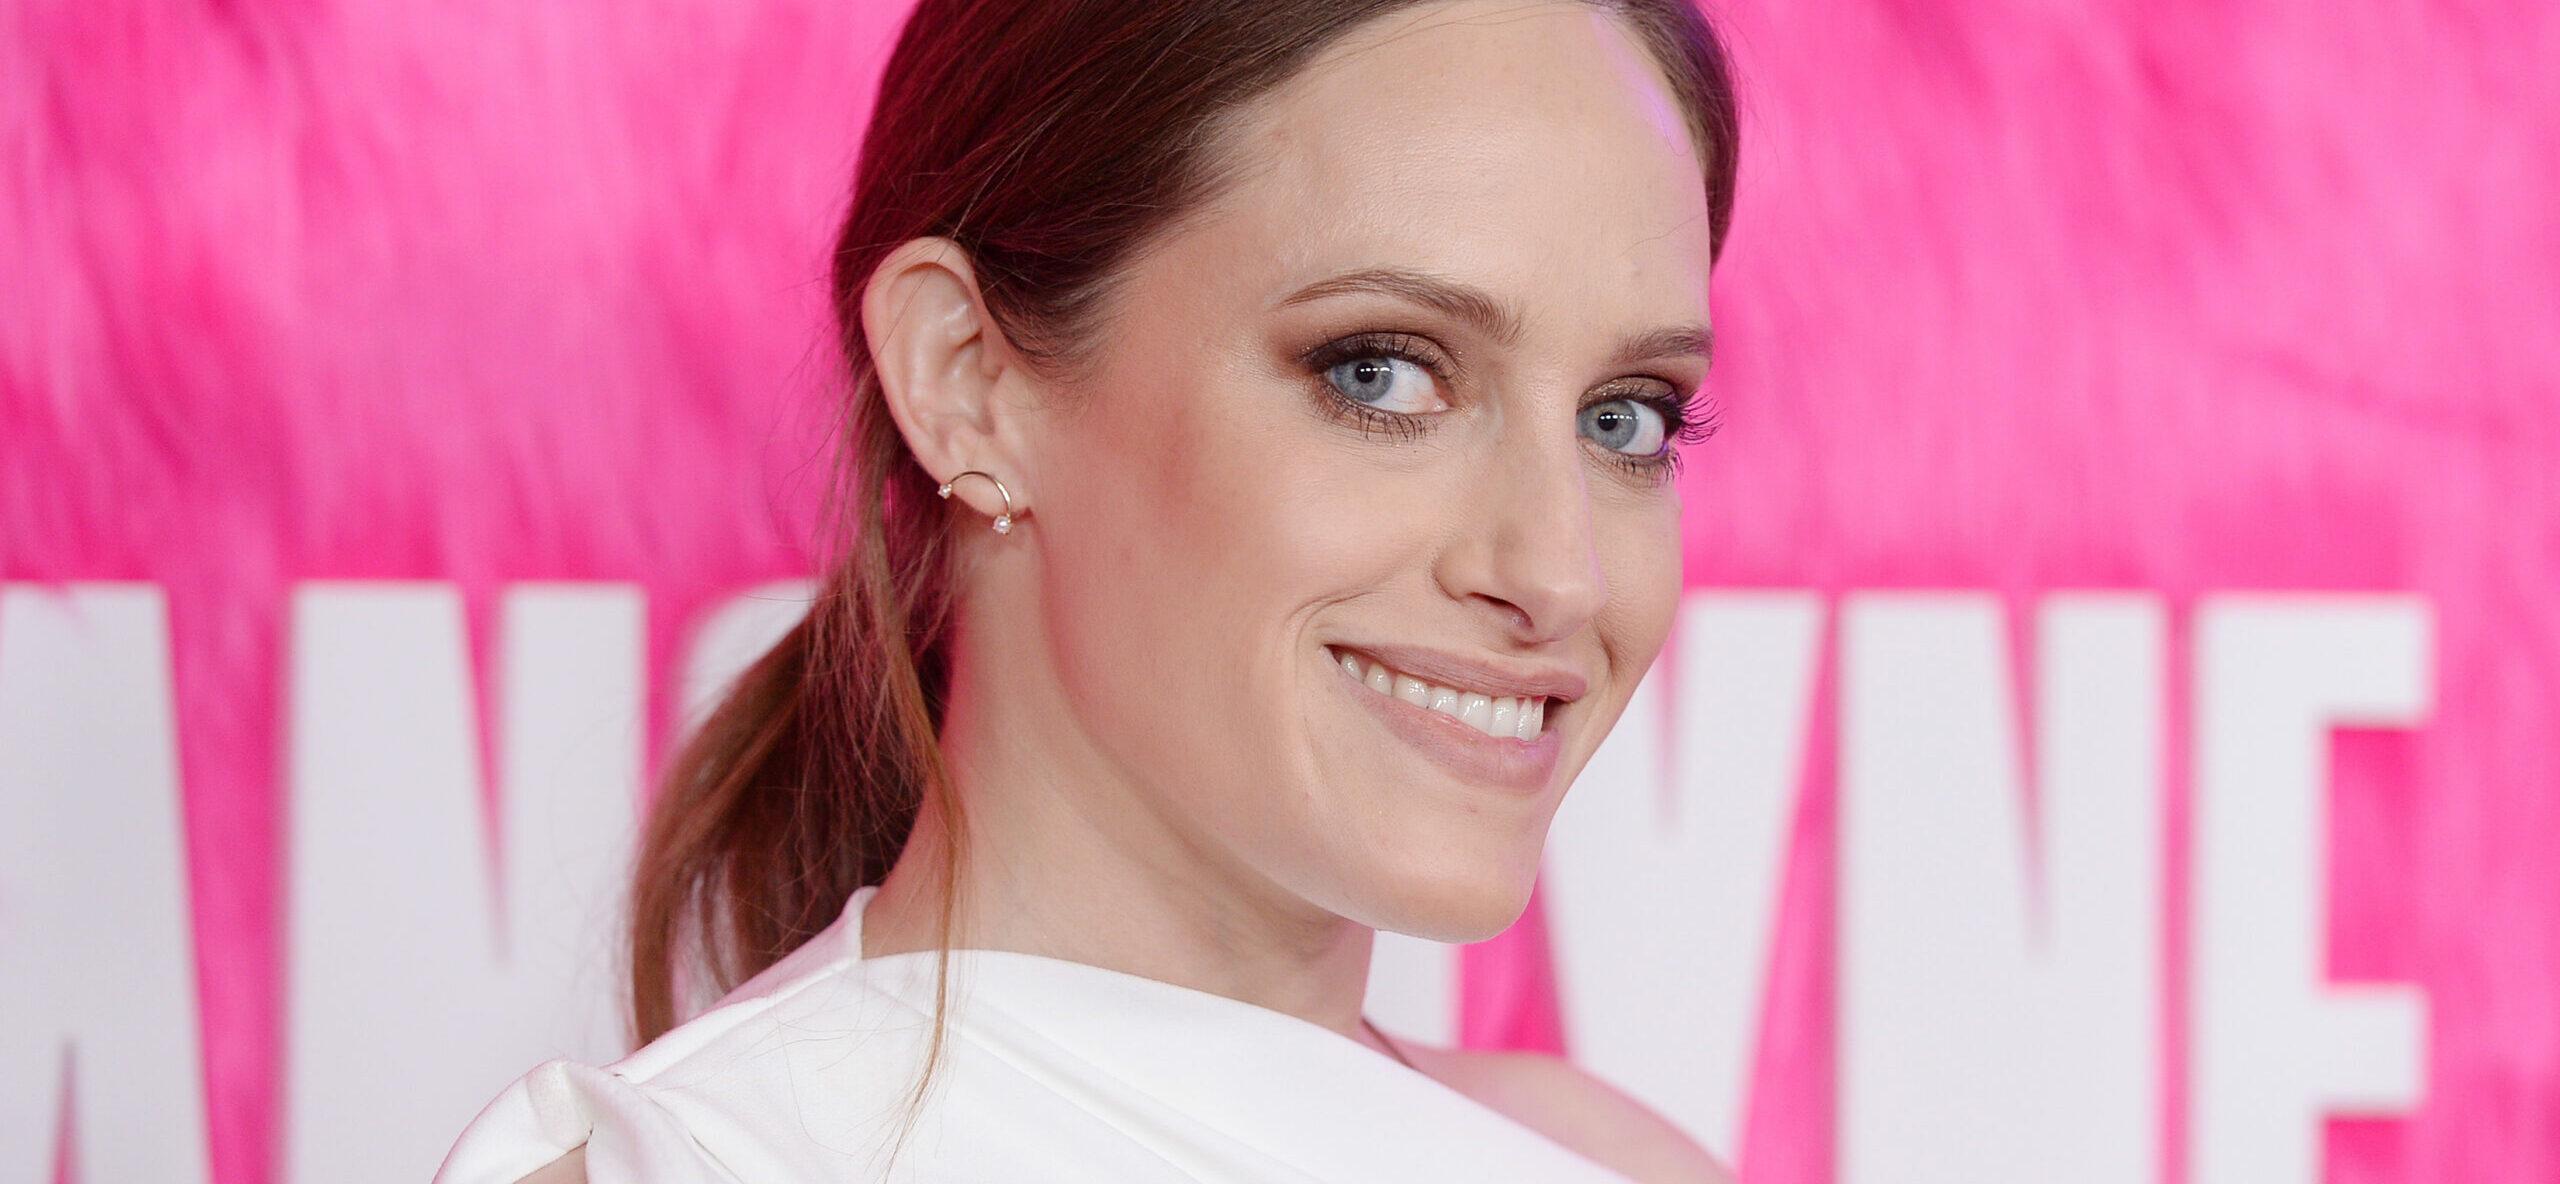 ‘Mr. Robot’ Star Carly Chaikin’s Husband Files For Divorce After Short Marriage